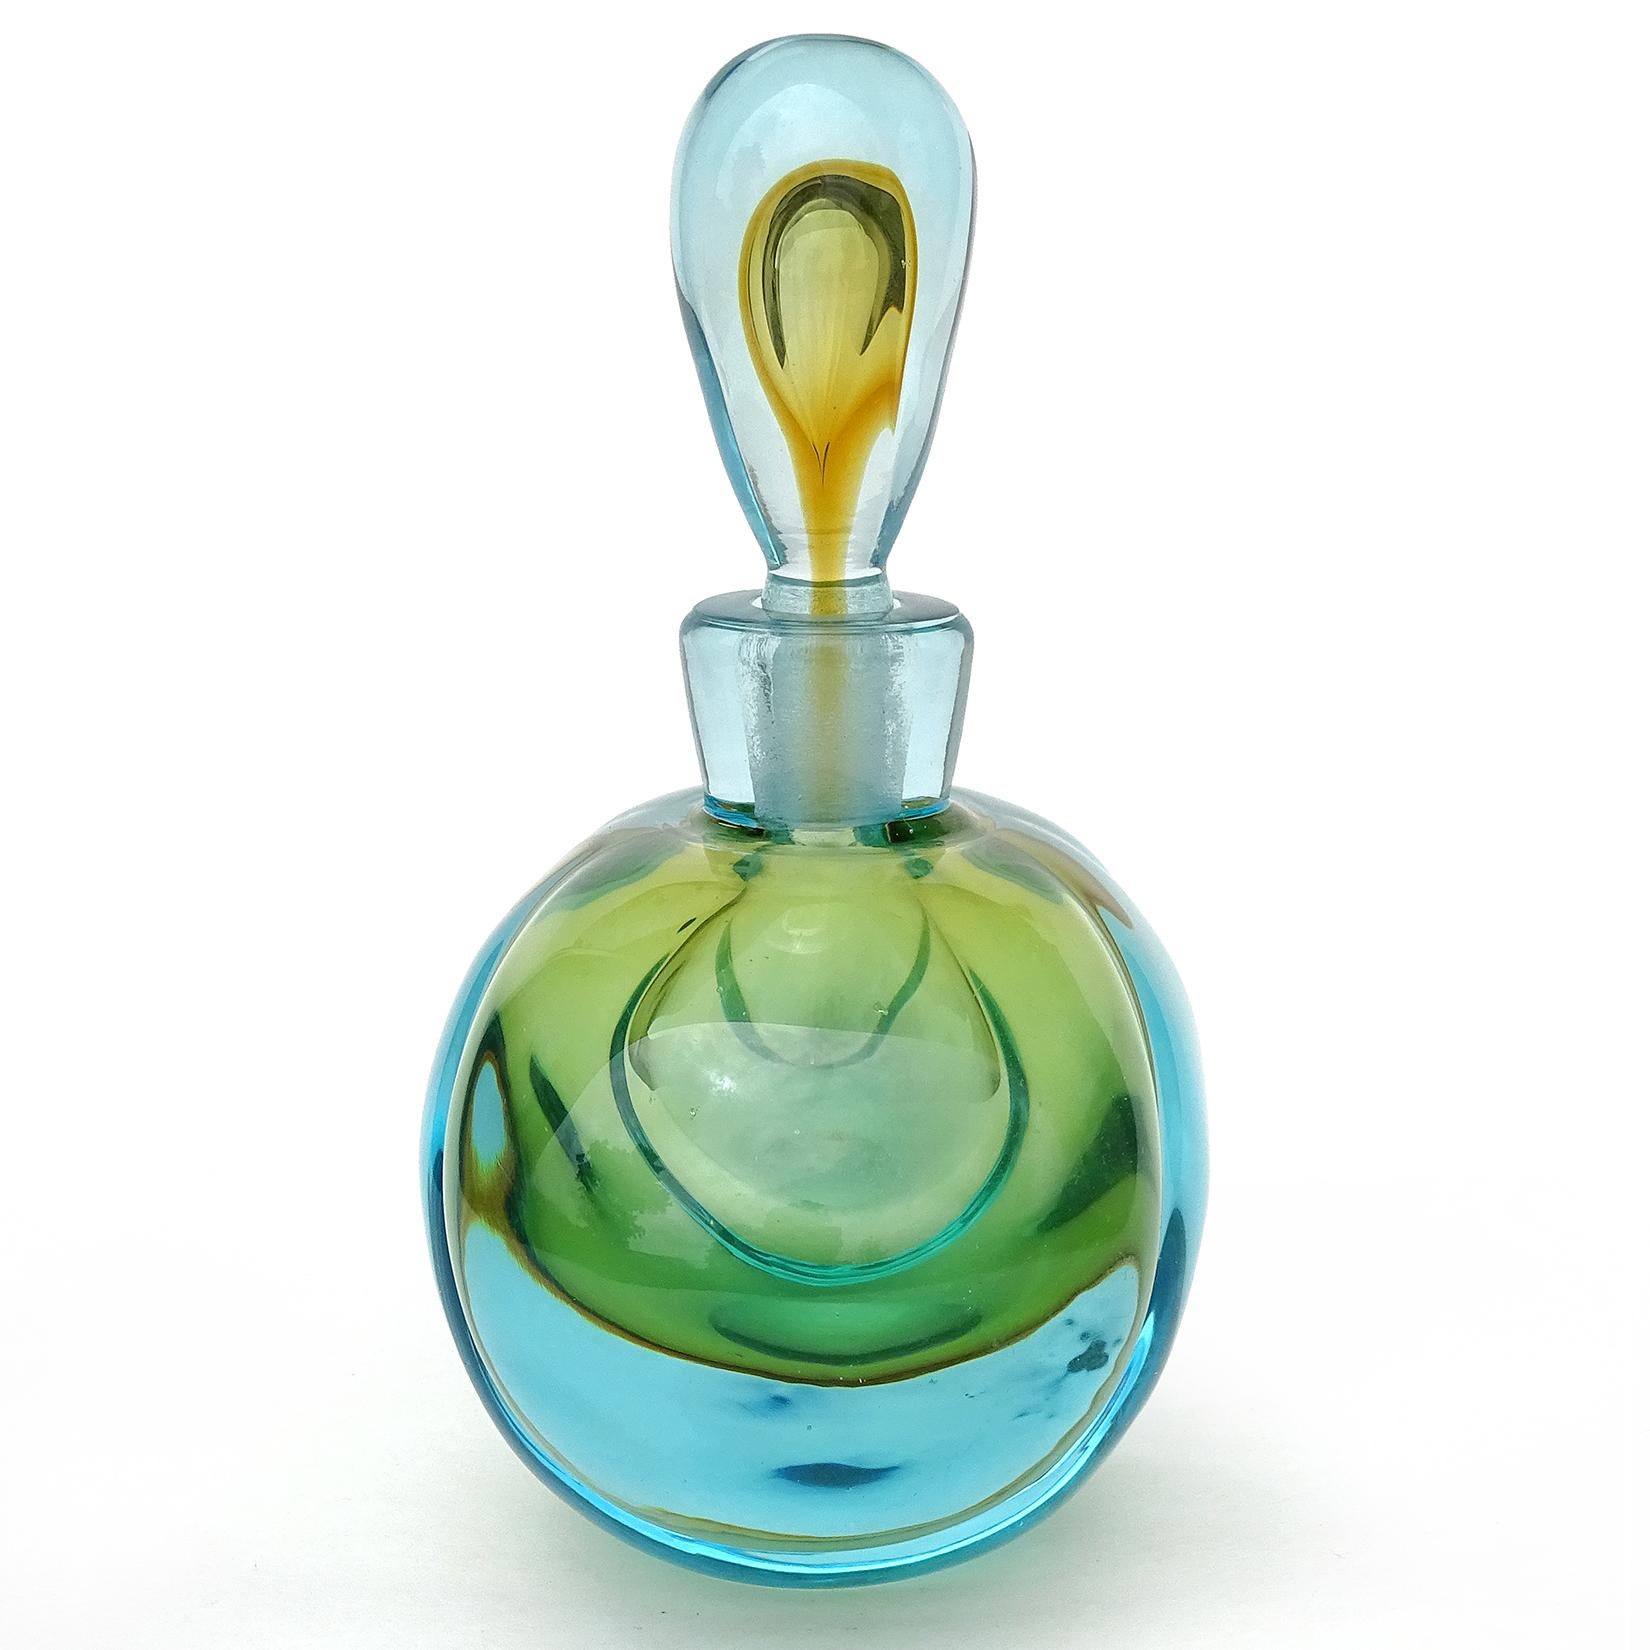 Beautiful large vintage Murano handblown Sommerso aqua blue over orange Italian art glass perfume bottle. Documented to master glass artist and designer Alfredo Barbini. Published in his catalog. The bottle has a large bulbous shape. It is made of